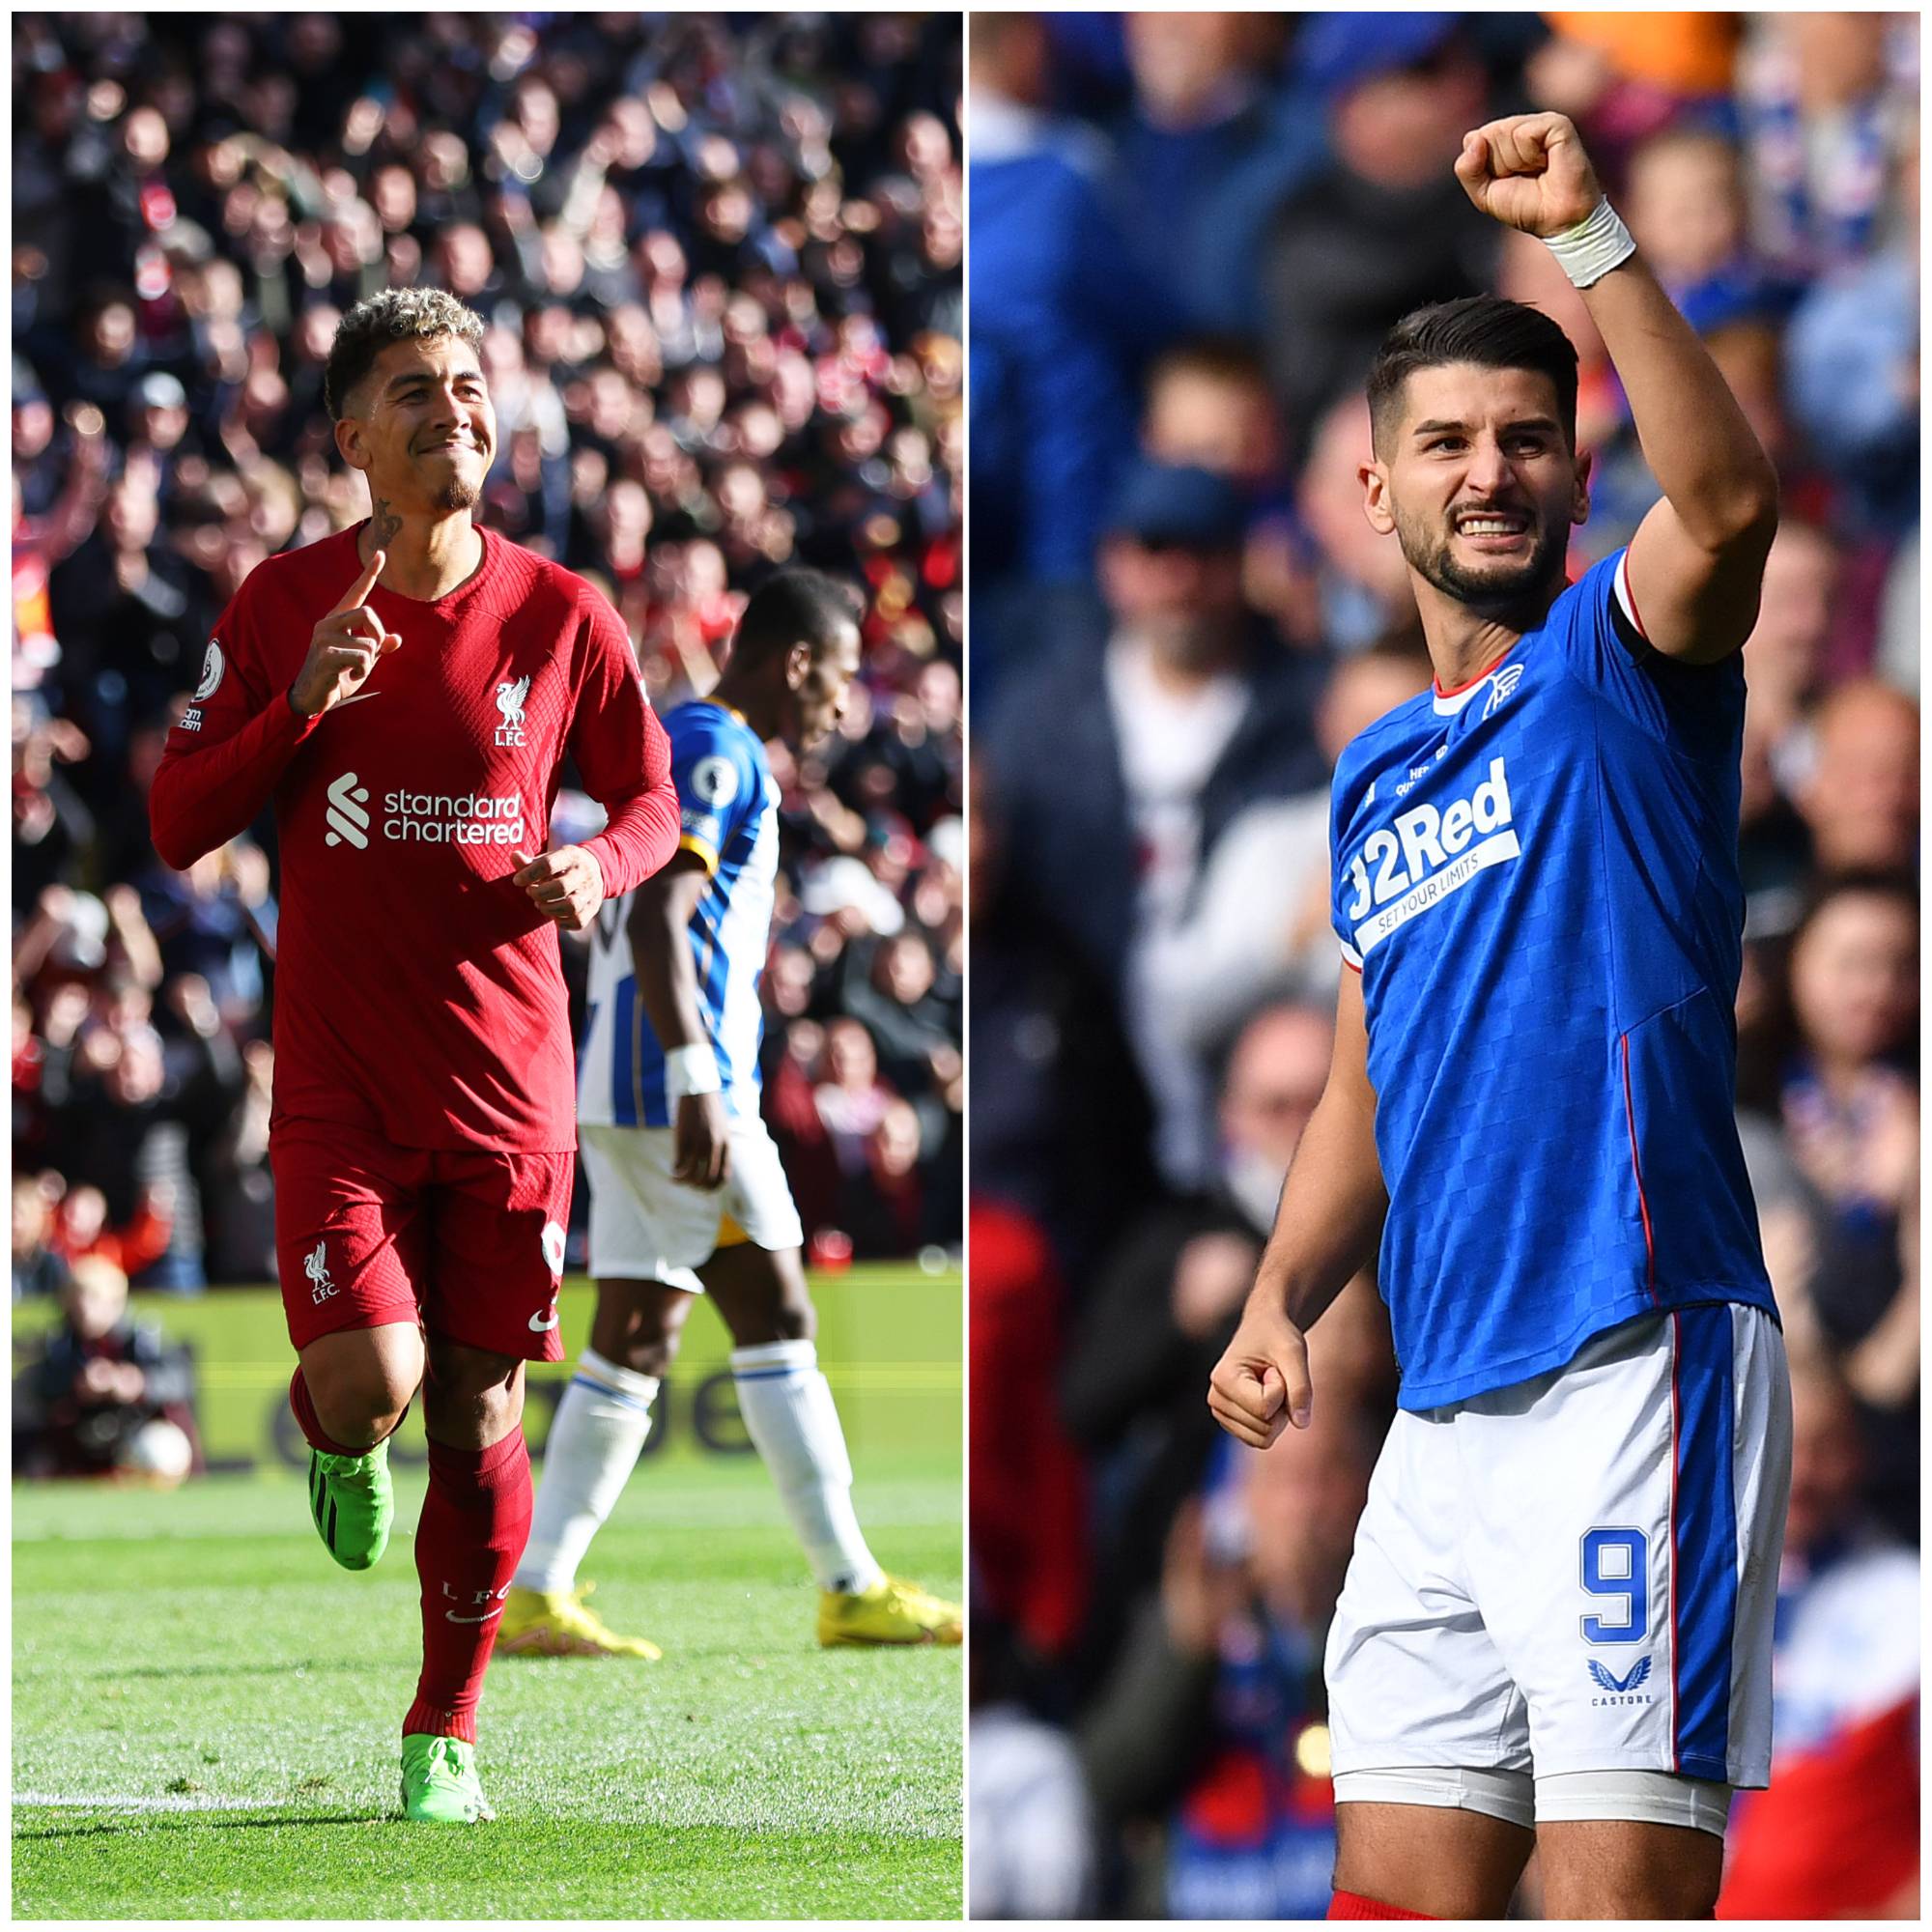 Roberto Firmino celebrating for Liverpool and Colak celebrating for Rangers